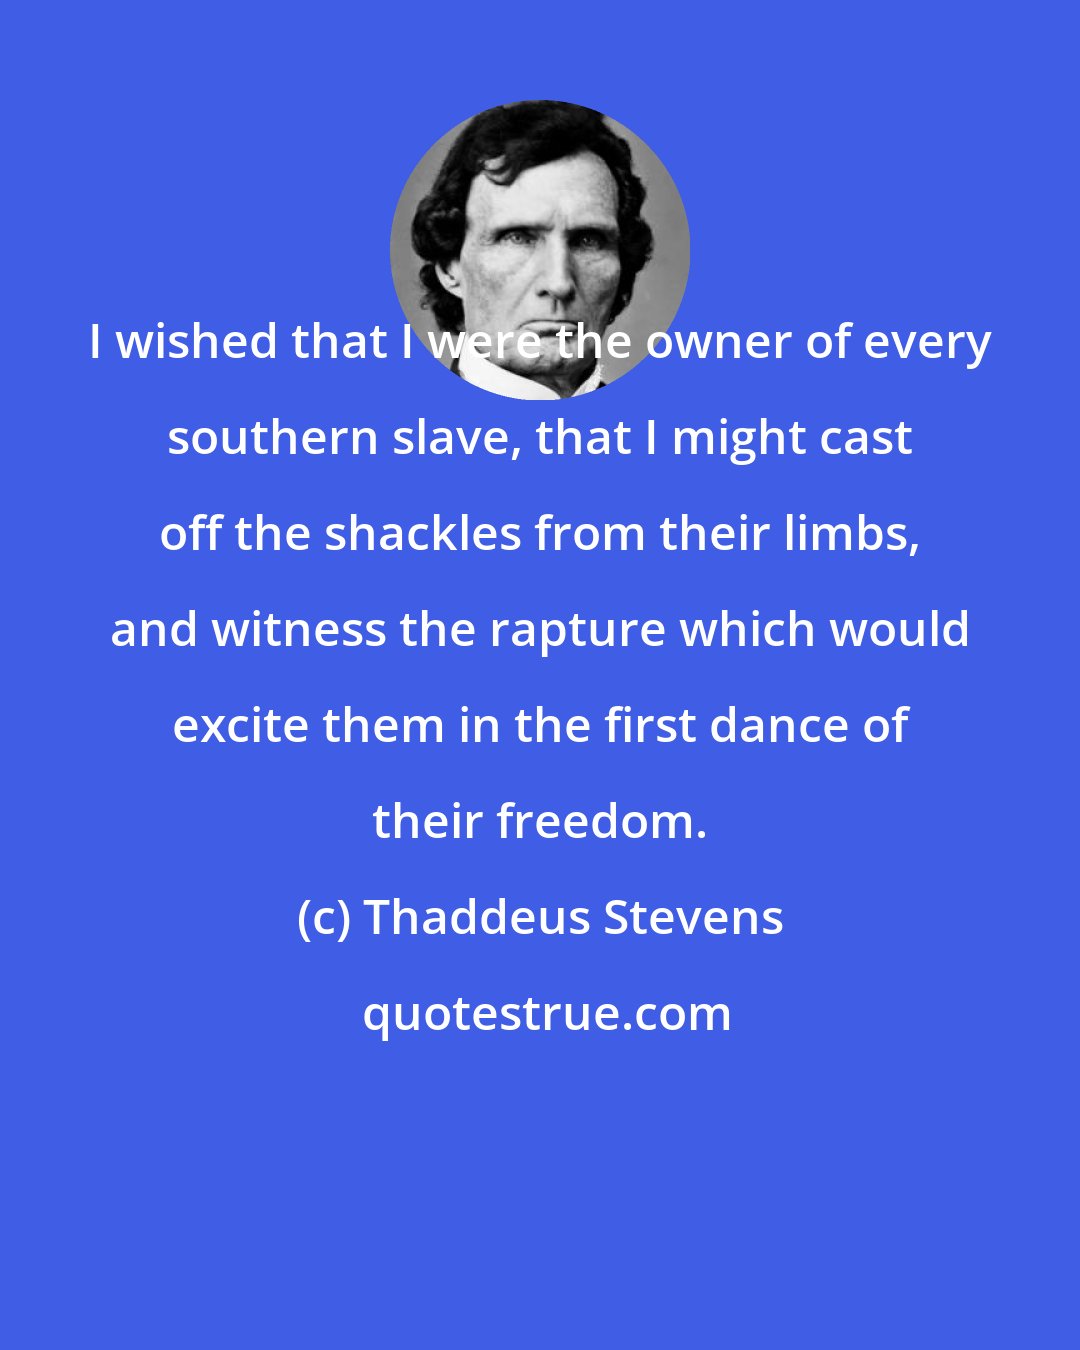 Thaddeus Stevens: I wished that I were the owner of every southern slave, that I might cast off the shackles from their limbs, and witness the rapture which would excite them in the first dance of their freedom.